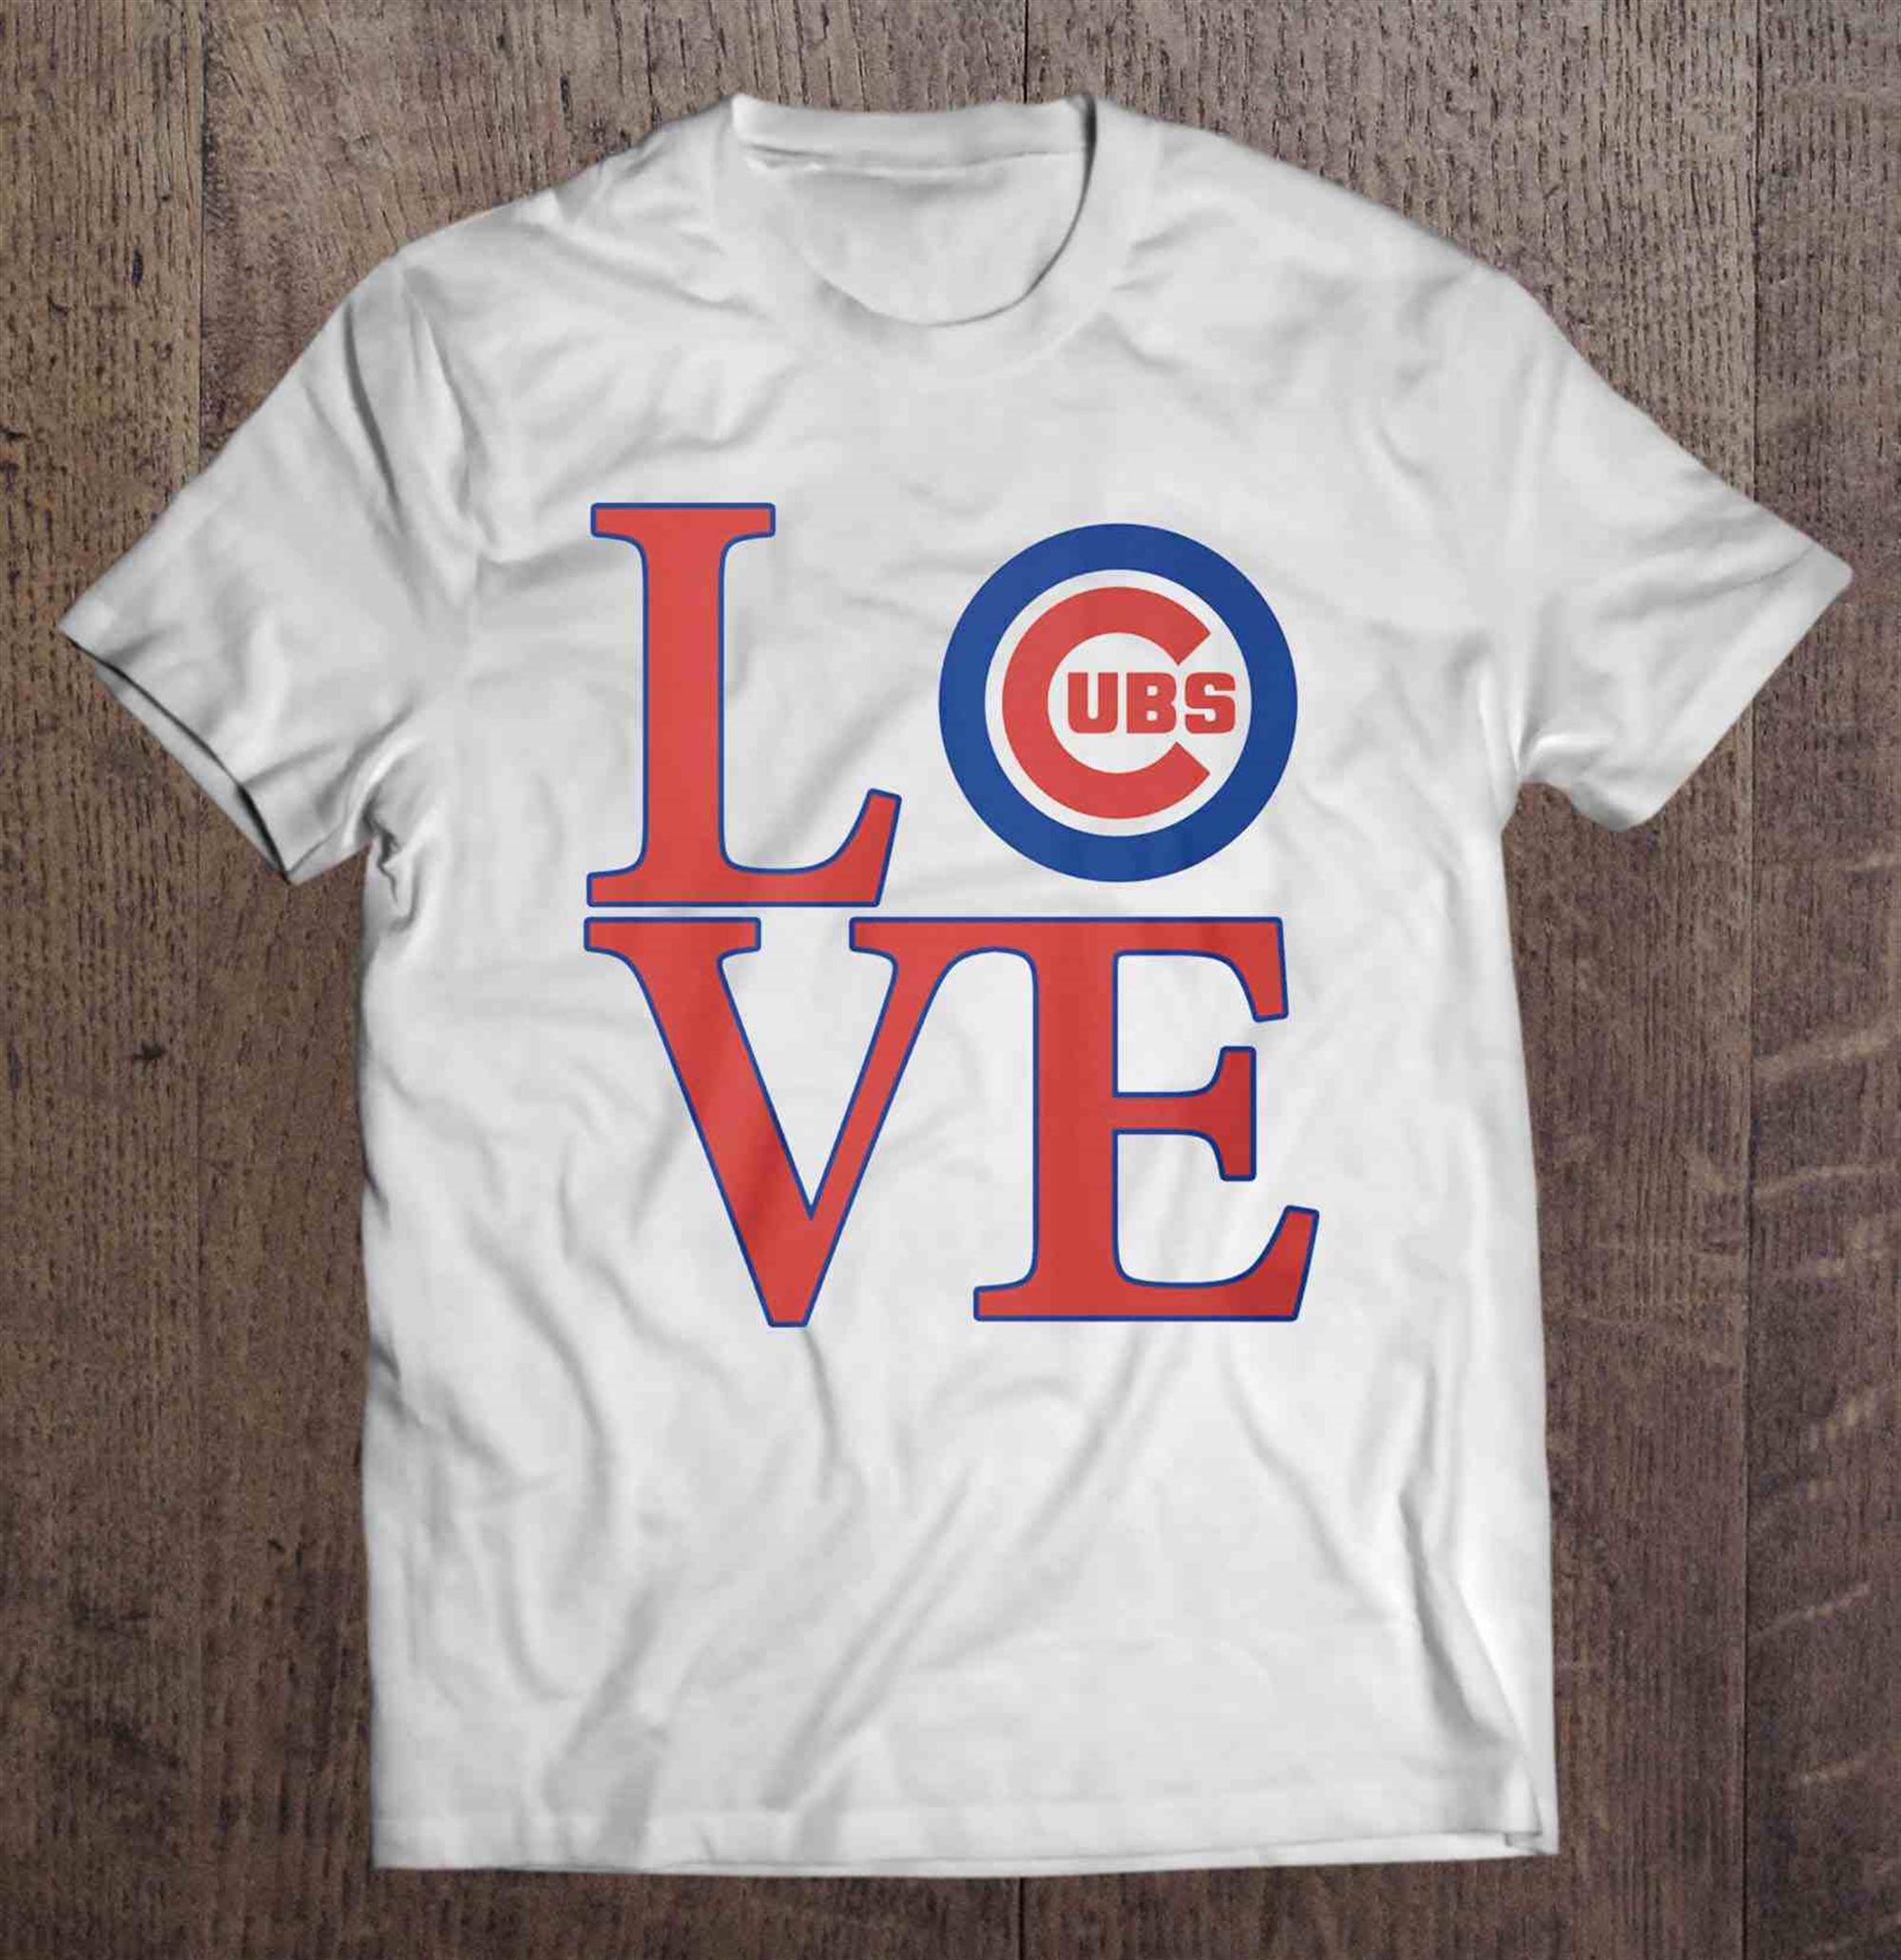 Love Chicago Cubs T-shirt Size Up To 5xl